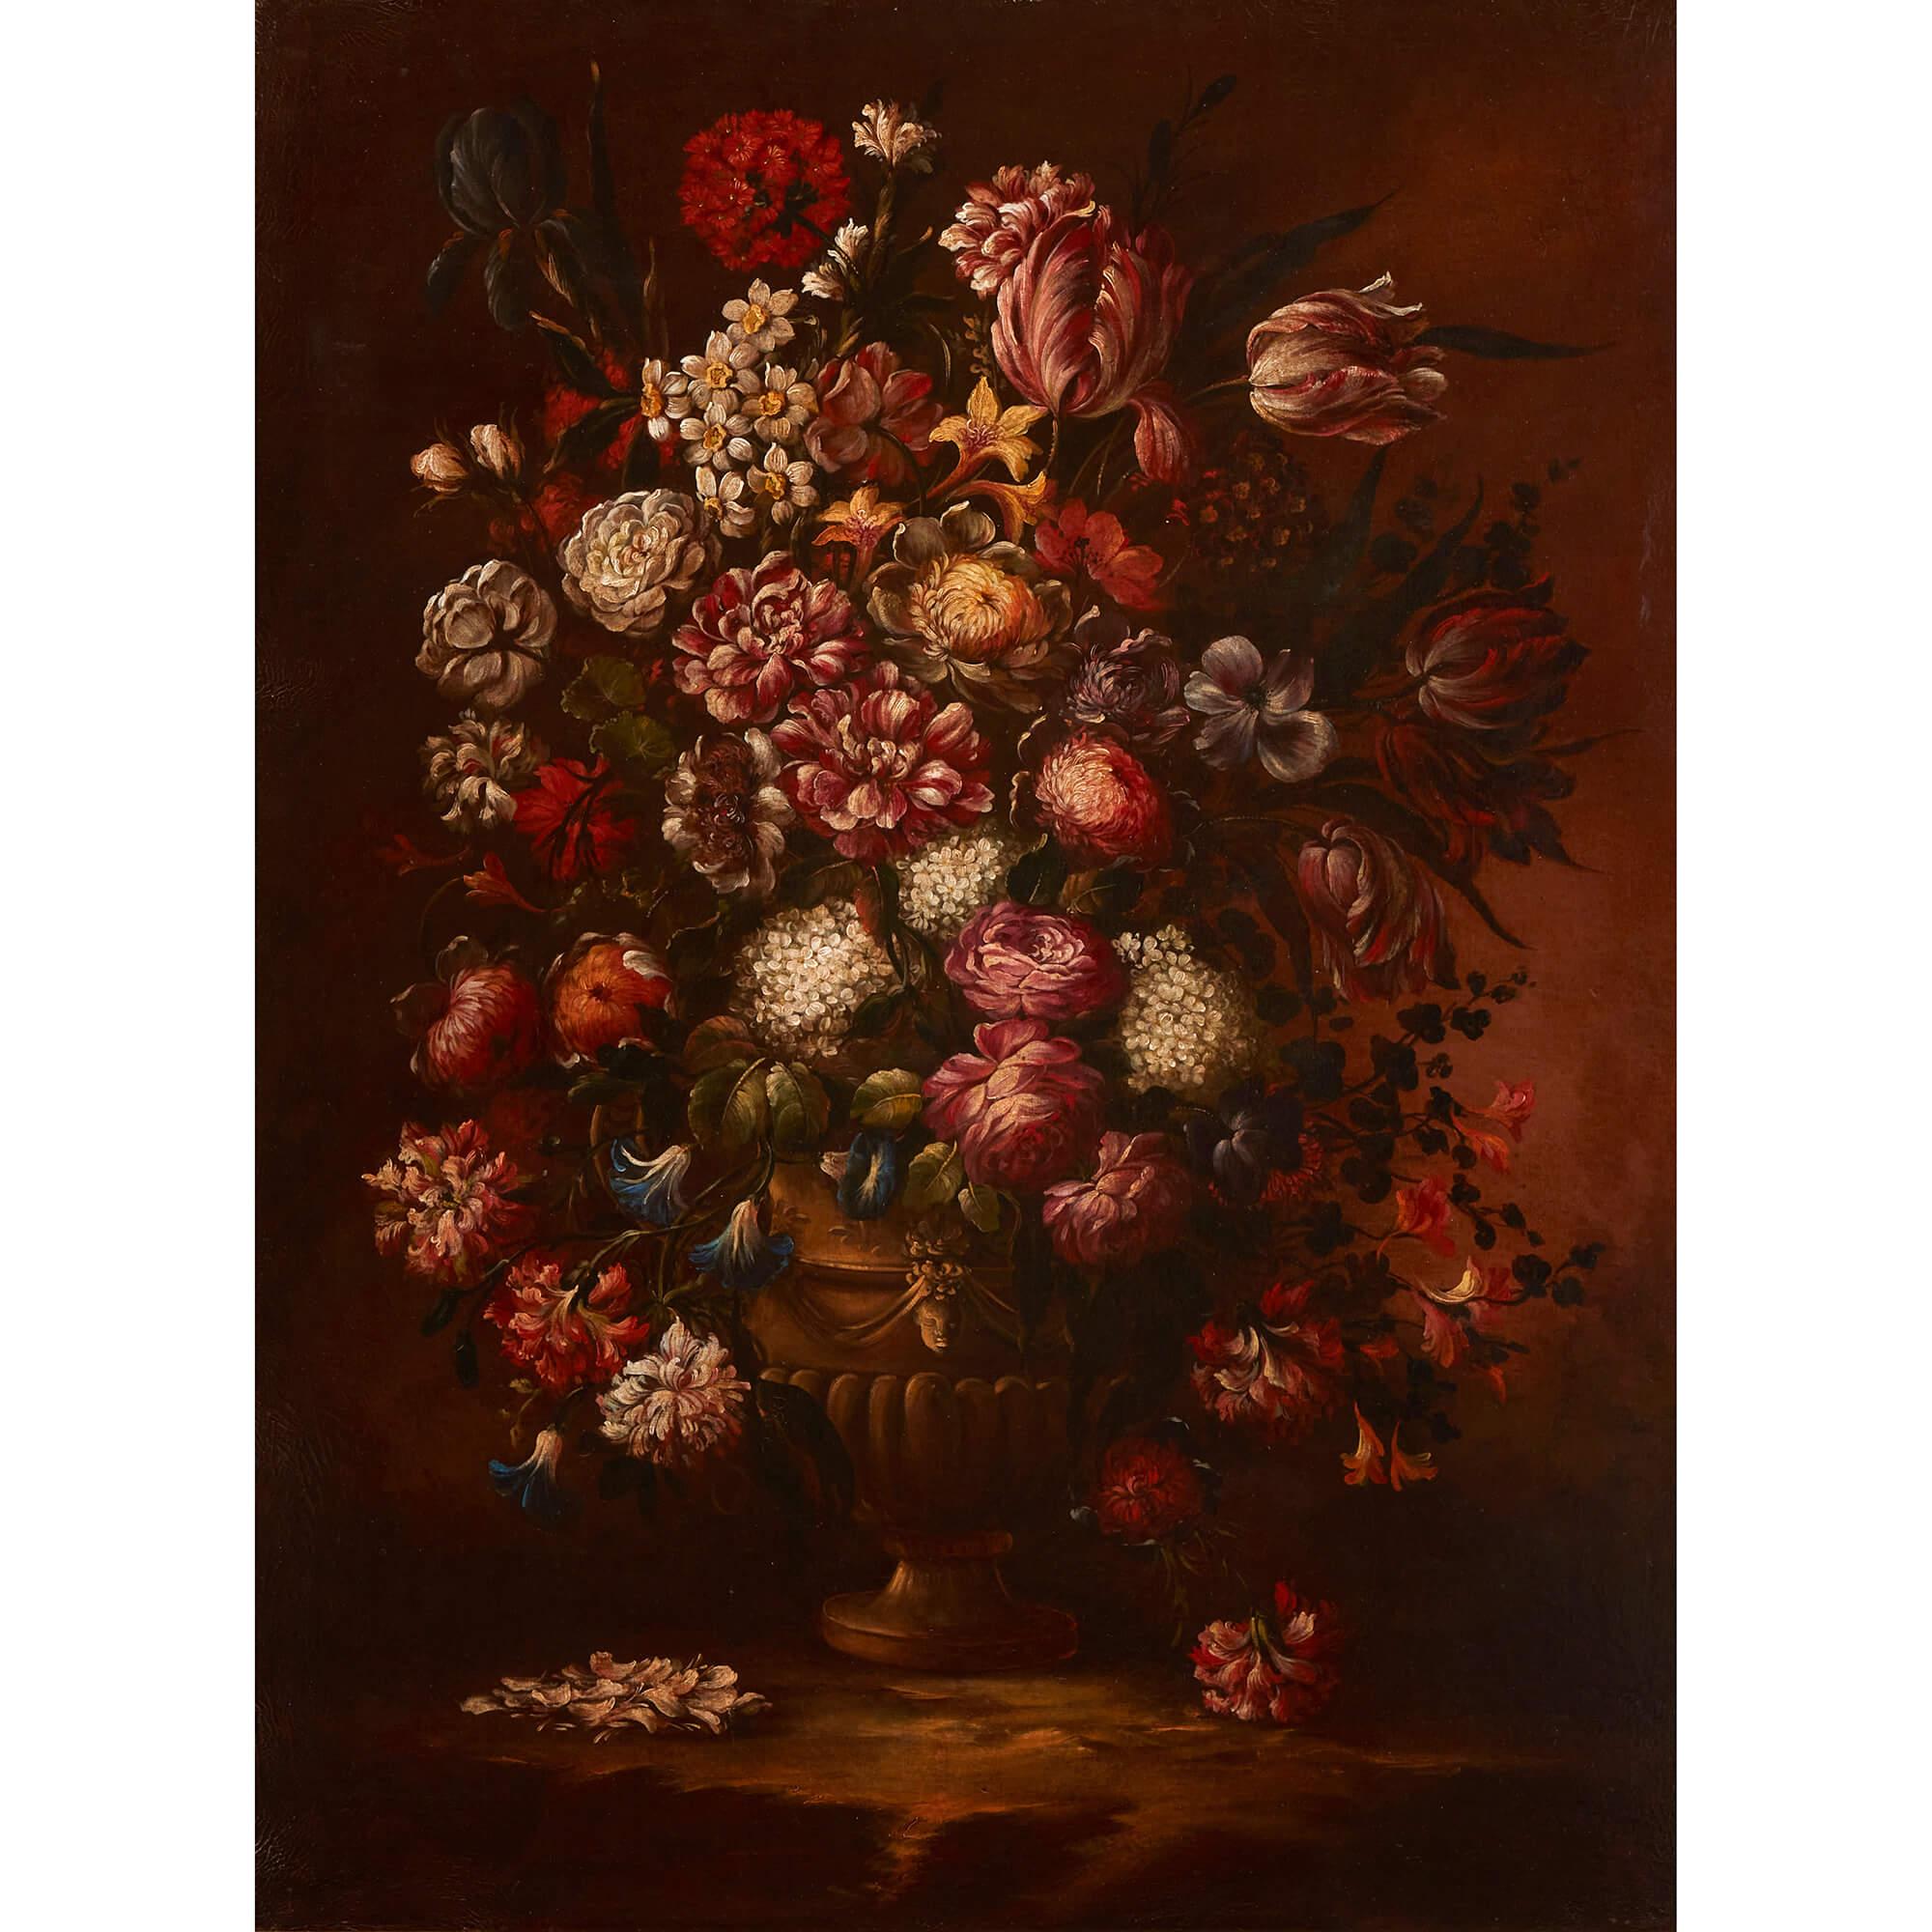 Pair of large floral still lifes in the Old Master style 
Continental, Early 20th Century
Canvas: Height 120cm, width 90cm
Frame: Height 141cm, width 111cm, depth 6cm

This pair of beautiful floral still-life paintings recall the style of the Dutch